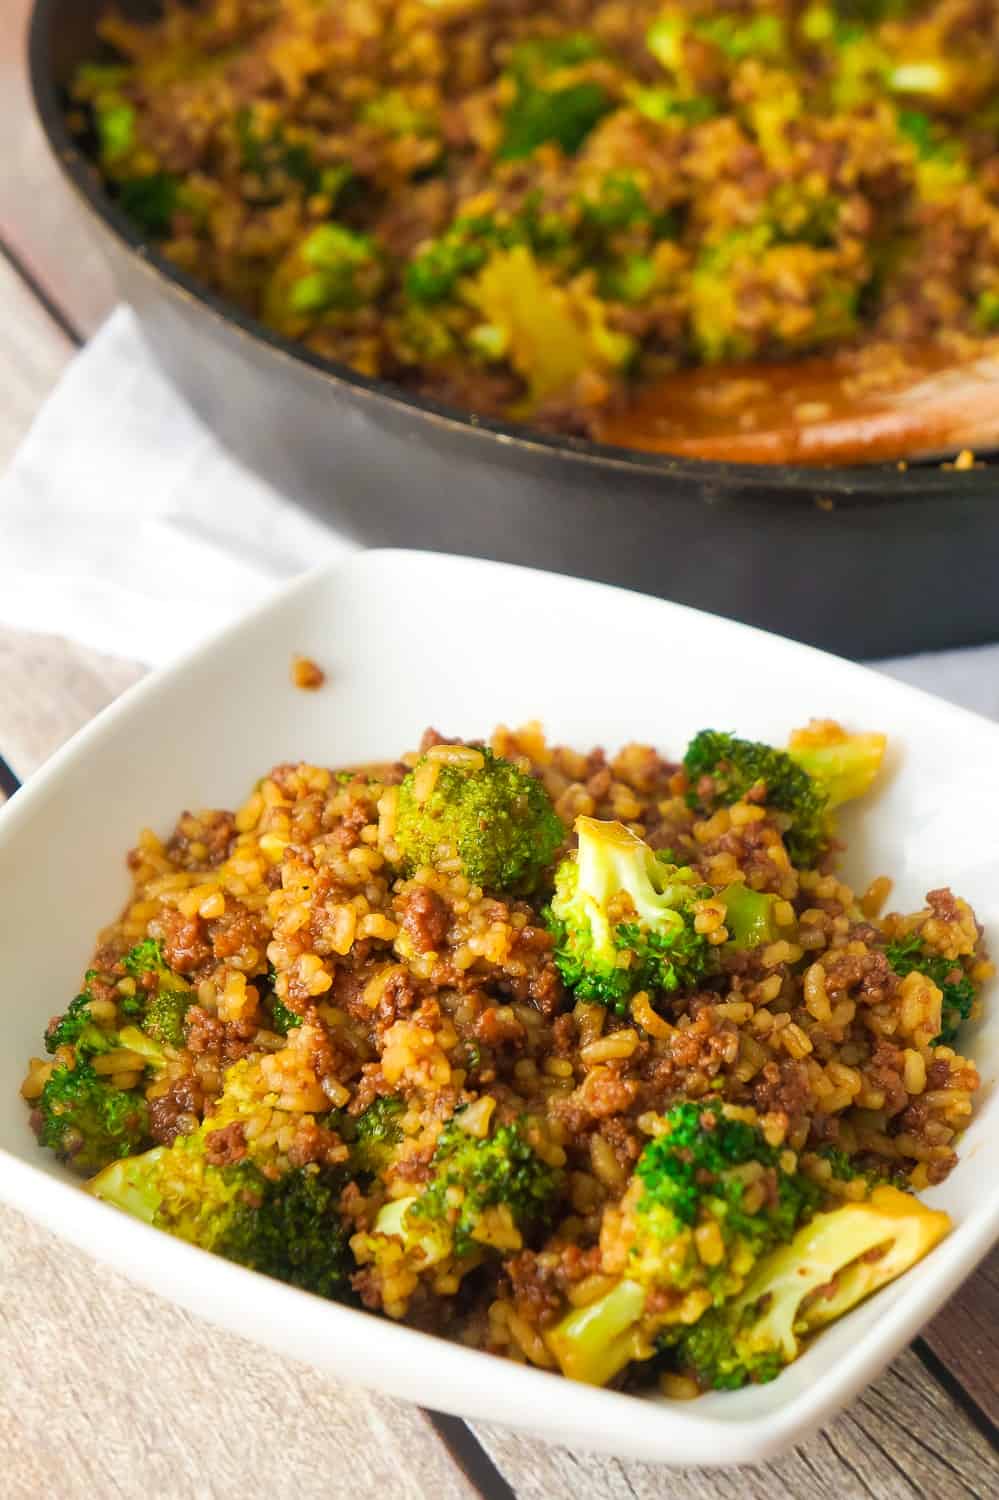 Honey Garlic Ground Beef and Rice with Broccoli is an easy stove top dinner recipe.This skillet dinner is loaded with ground beef, instant rice and broccoli florets all tossed in honey garlic sauce.